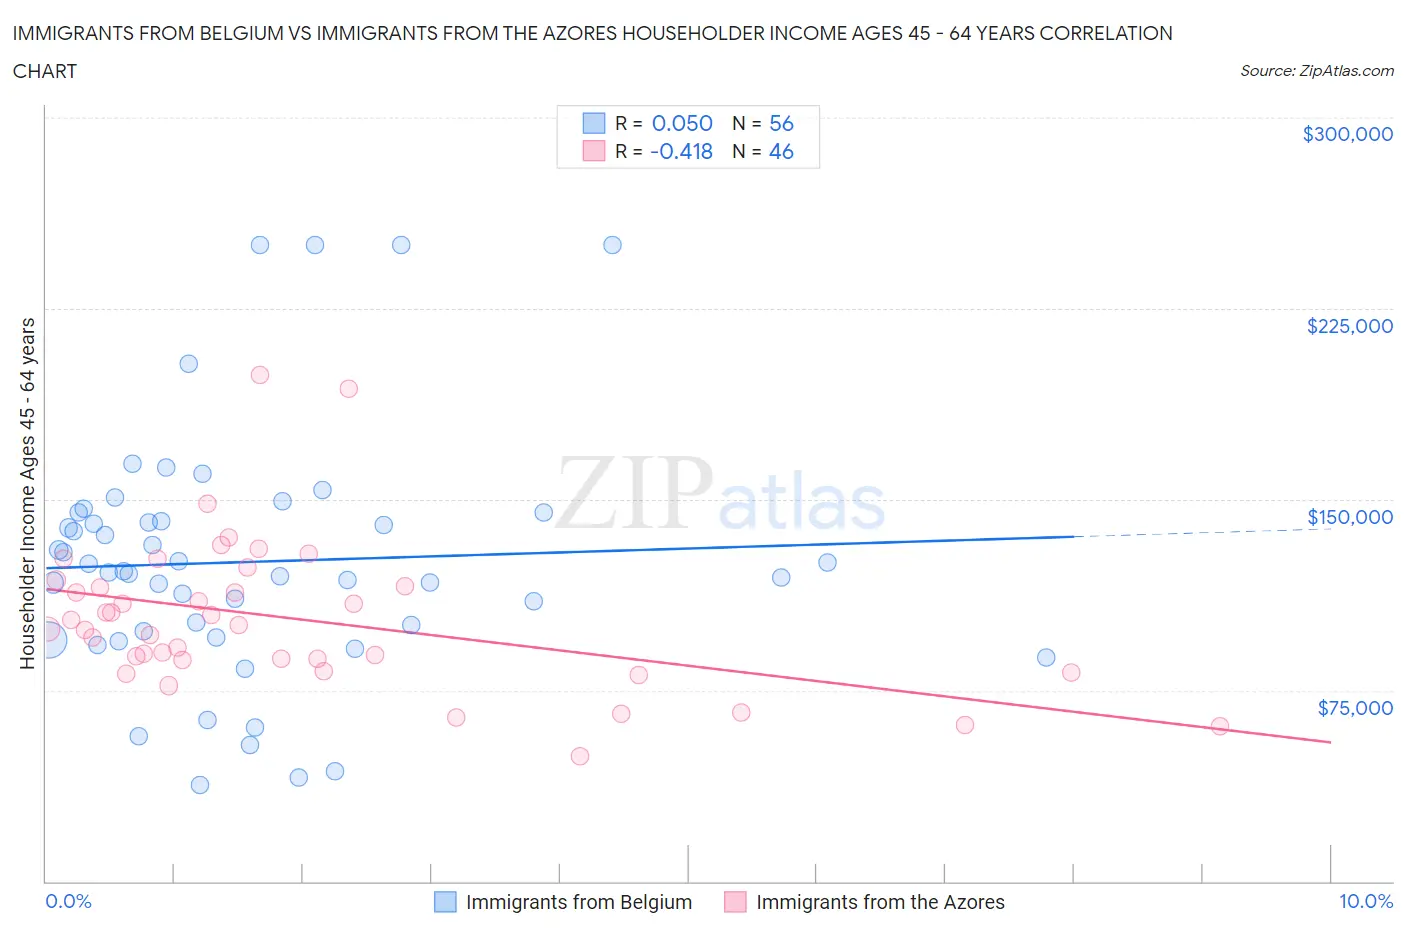 Immigrants from Belgium vs Immigrants from the Azores Householder Income Ages 45 - 64 years